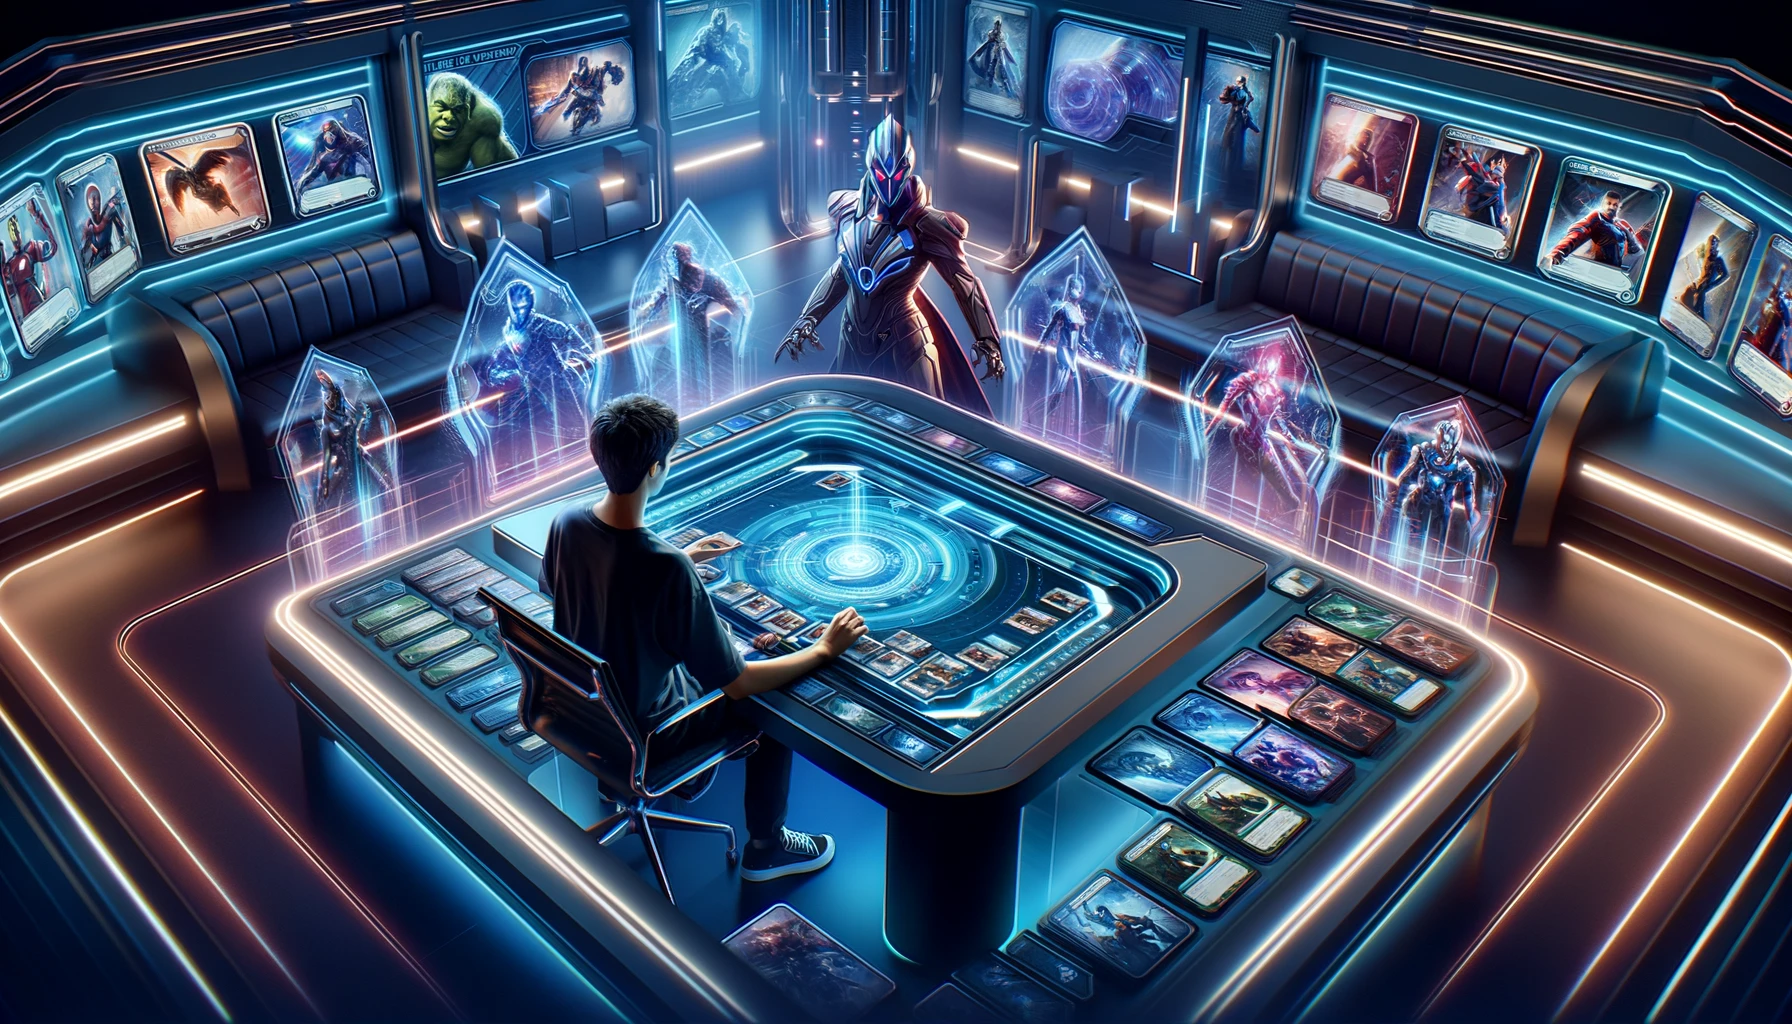 A highly realistic scene of a player surrounded by holographic cards and futuristic gaming equipment, immersed in Marvel Snap gameplay.